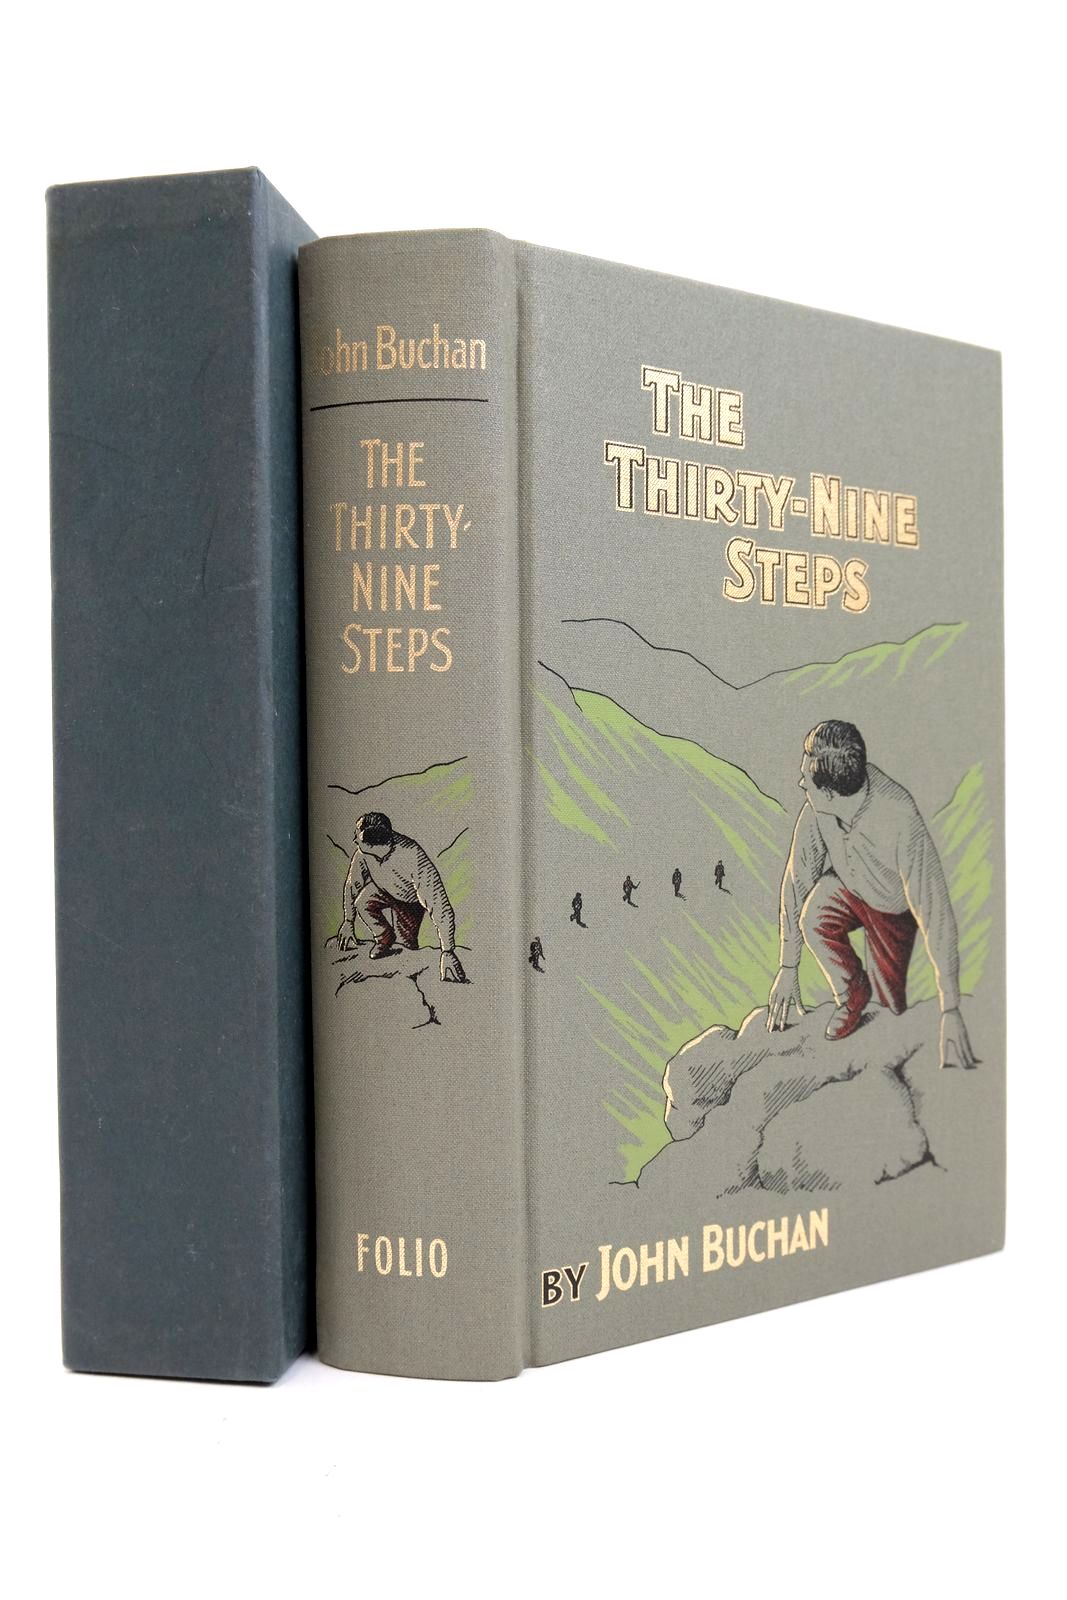 Photo of THE THIRTY-NINE STEPS AND THE POWER-HOUSE written by Buchan, John
Lownie, Andrew illustrated by Hardcastle, Nick published by Folio Society (STOCK CODE: 2139495)  for sale by Stella & Rose's Books